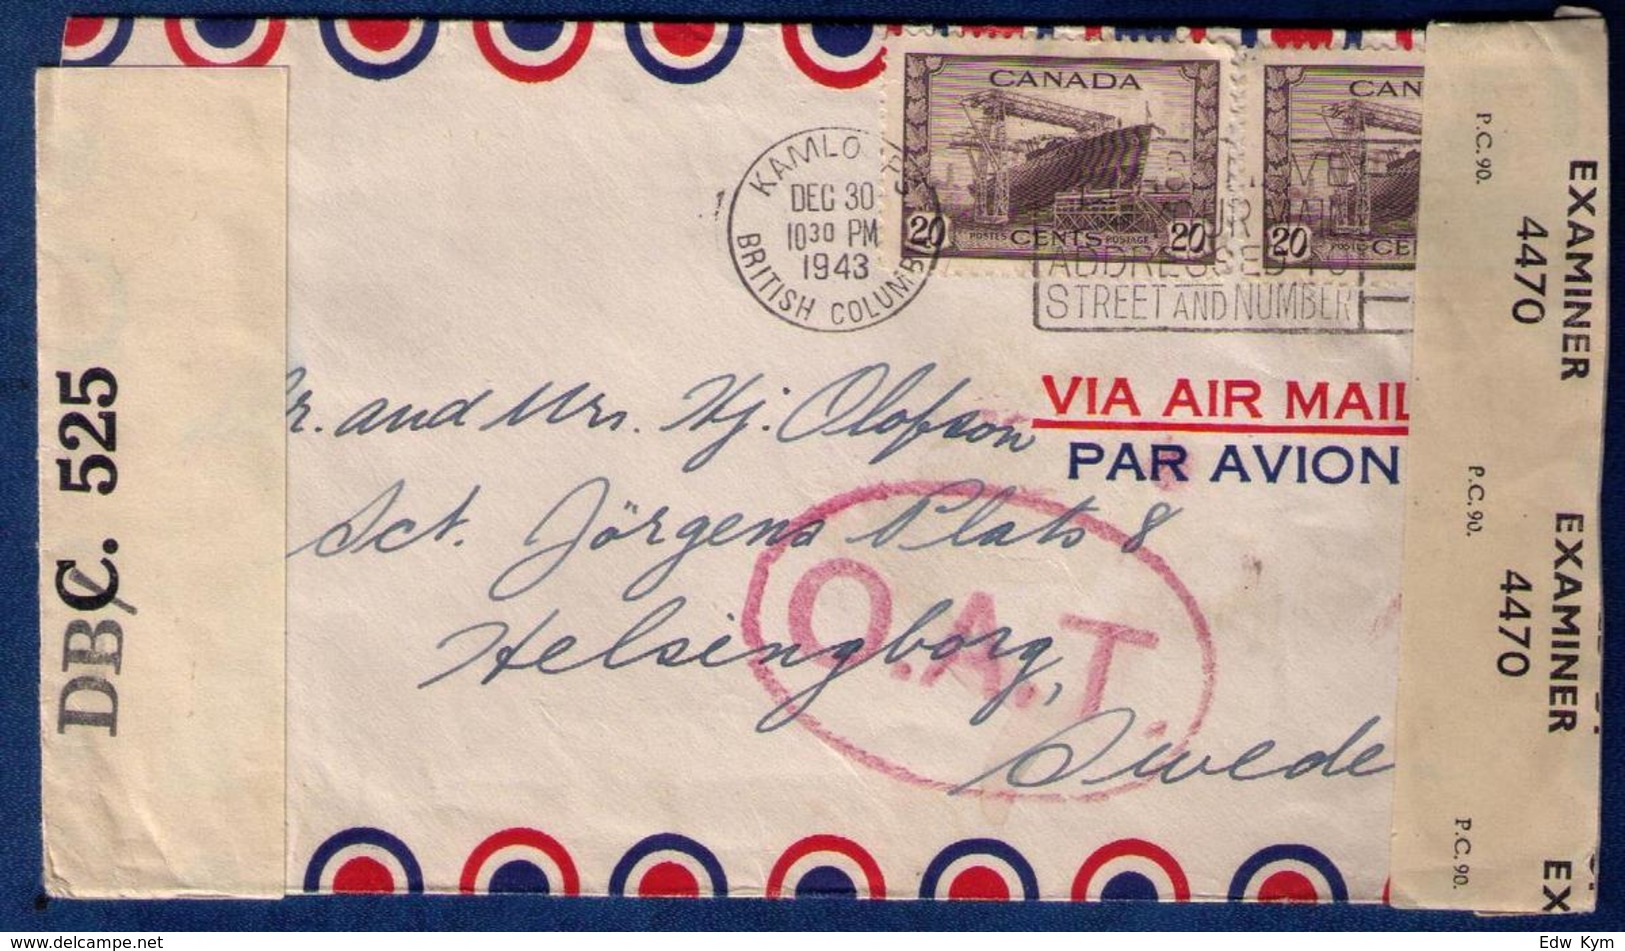 Kamloops BC (1943) Canada Scott 260 Pair O.A.T.Handstamp British Columbia Cancelled 12-30-1943 Postal Cover - Covers & Documents